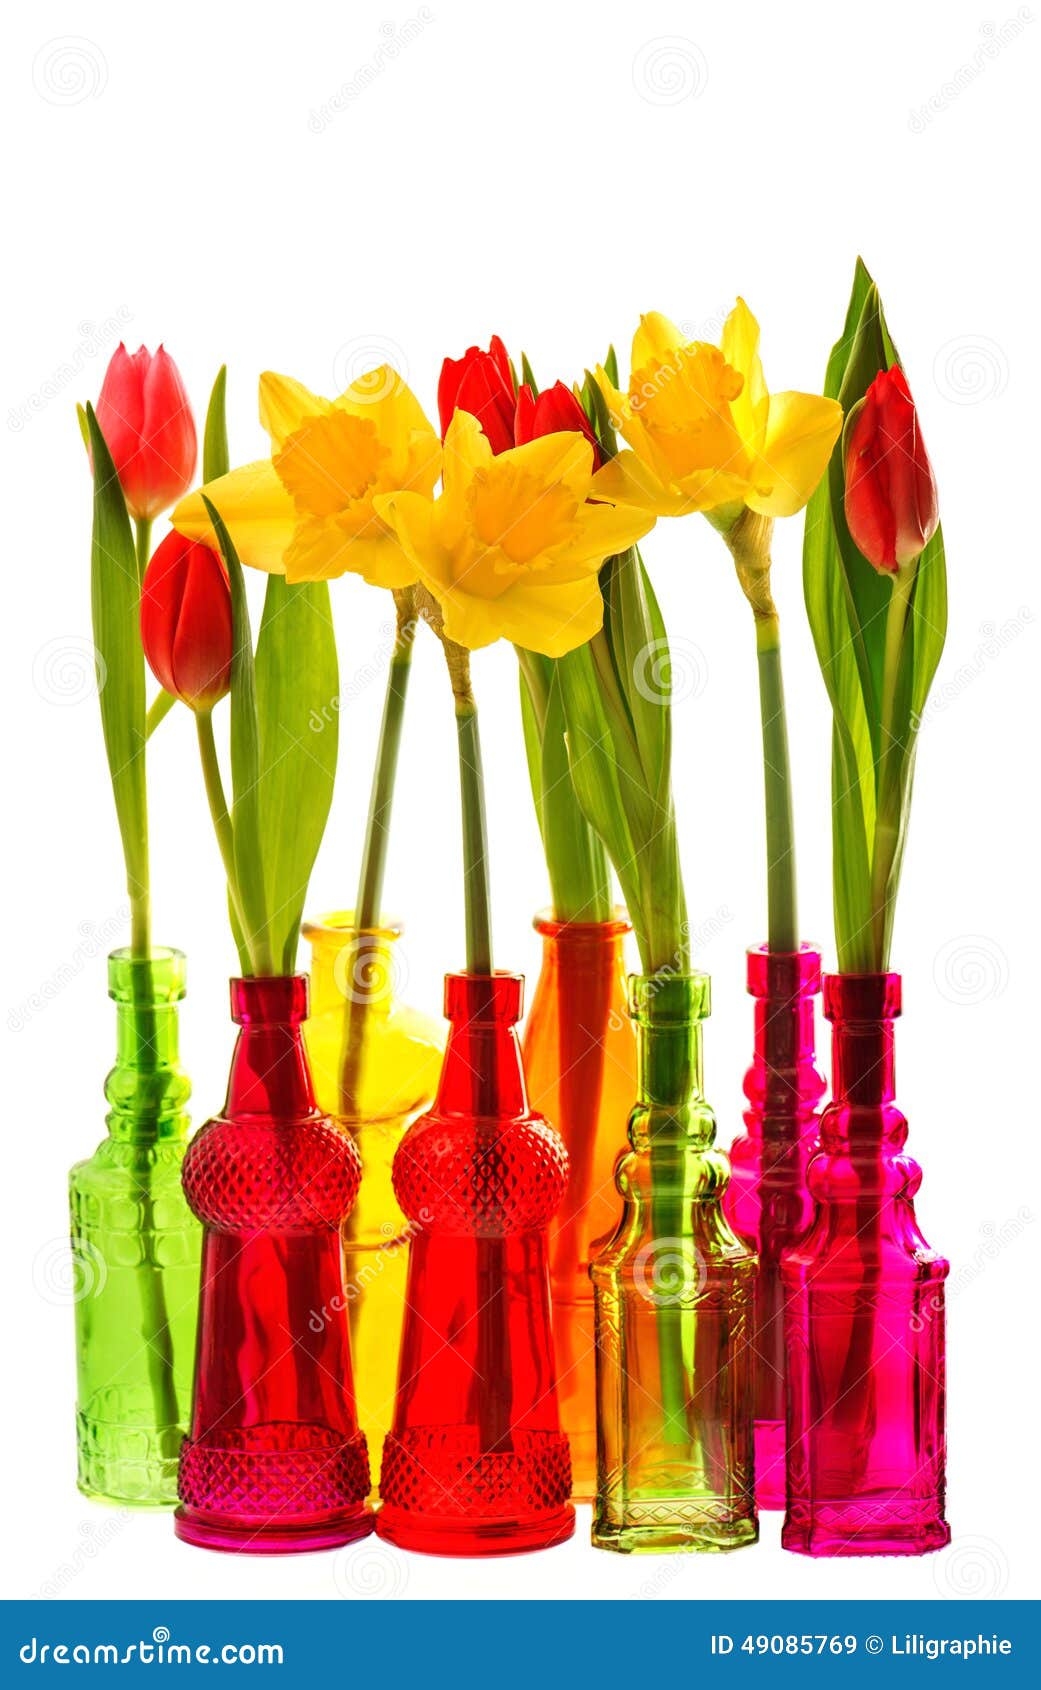 Spring Flowers Tulip And Narcissus In Colorful Glass Vases Stock Image ...